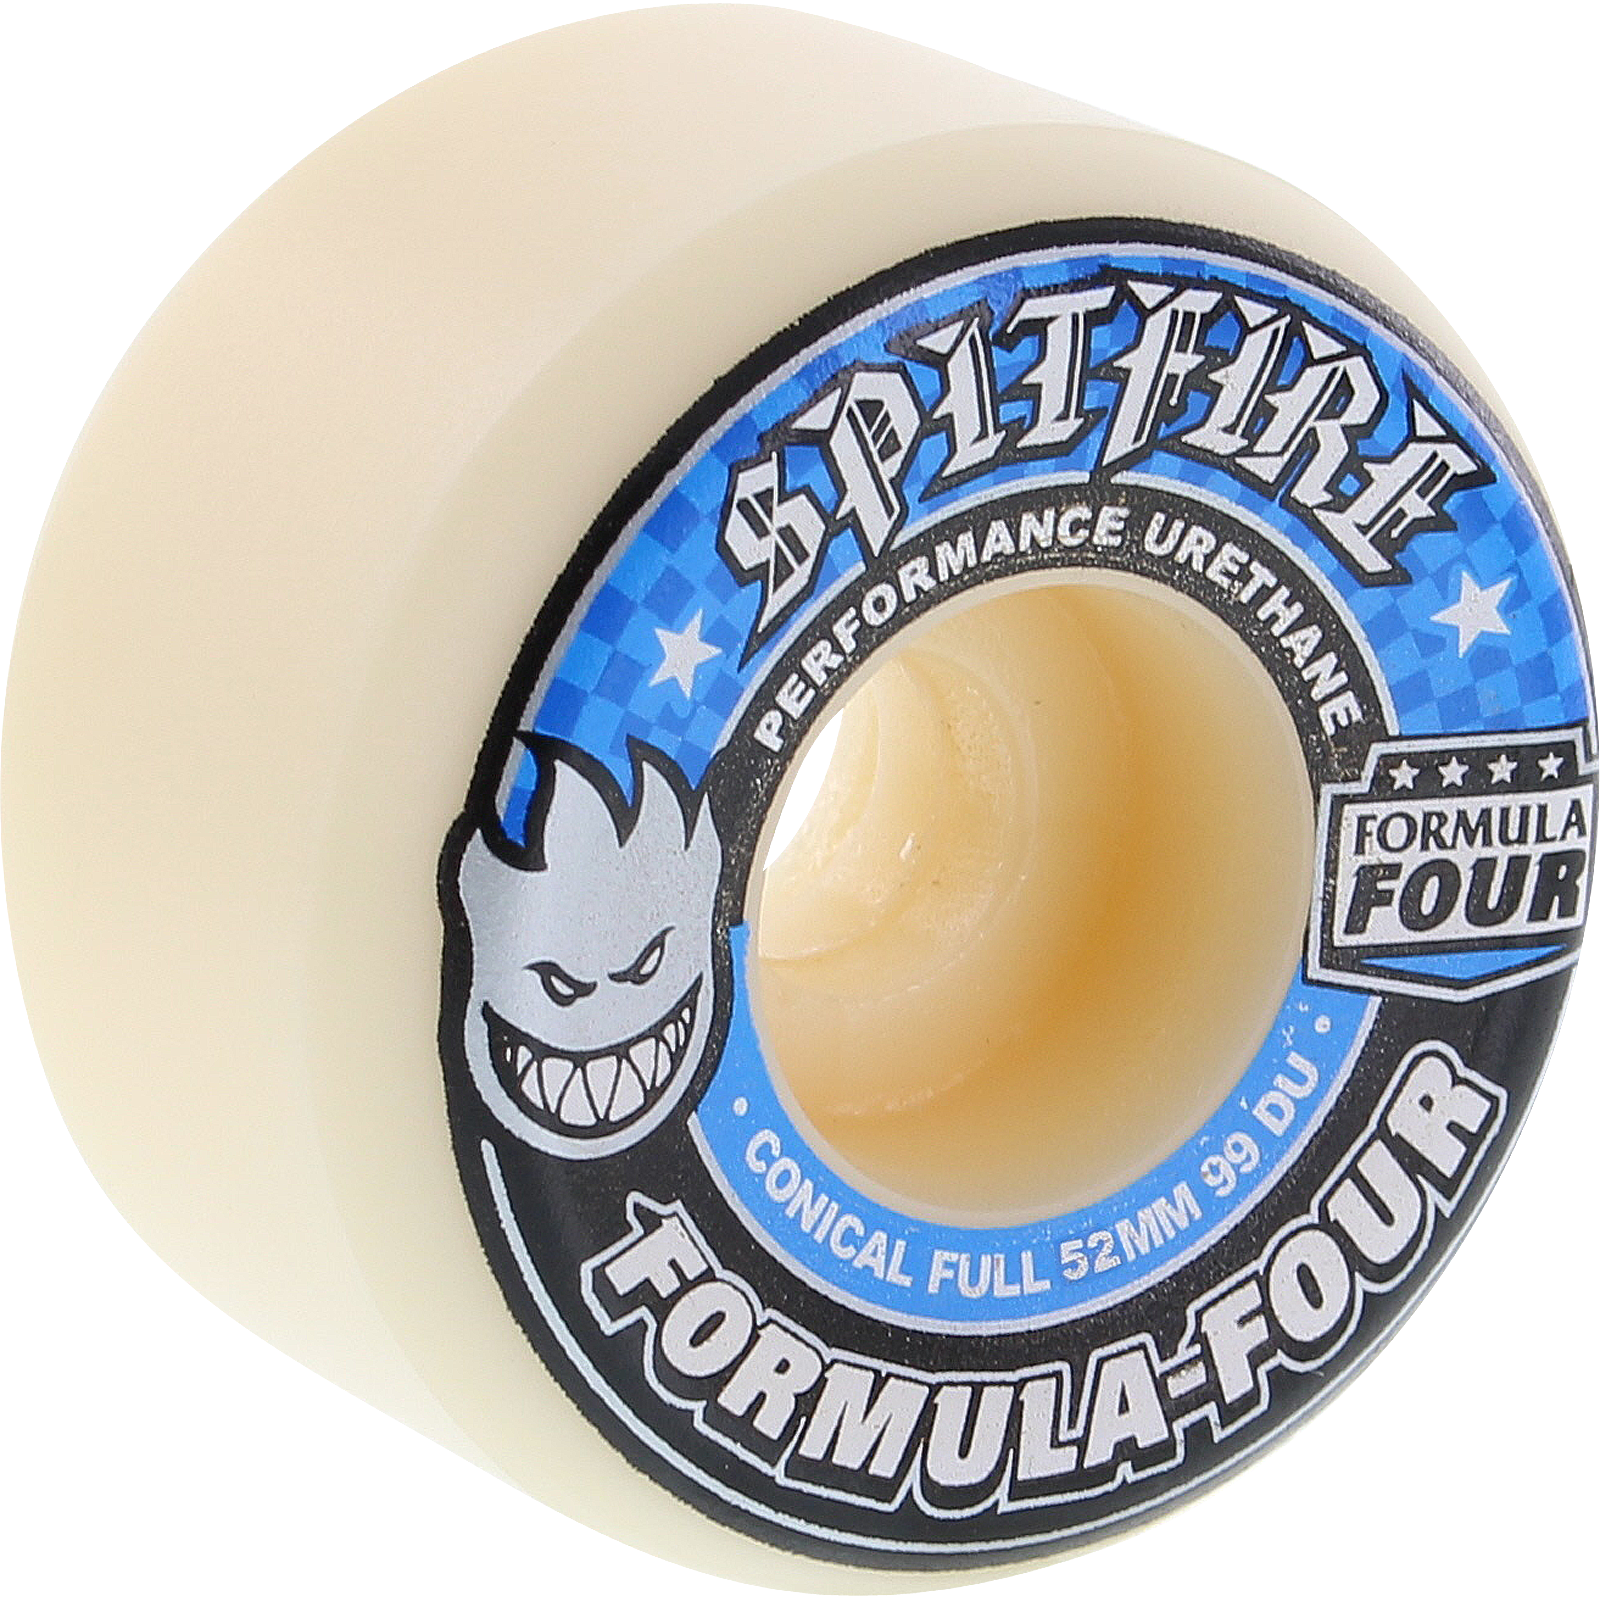 Spitfire F4 99a Conical Full 53mm Wheels White/Blue